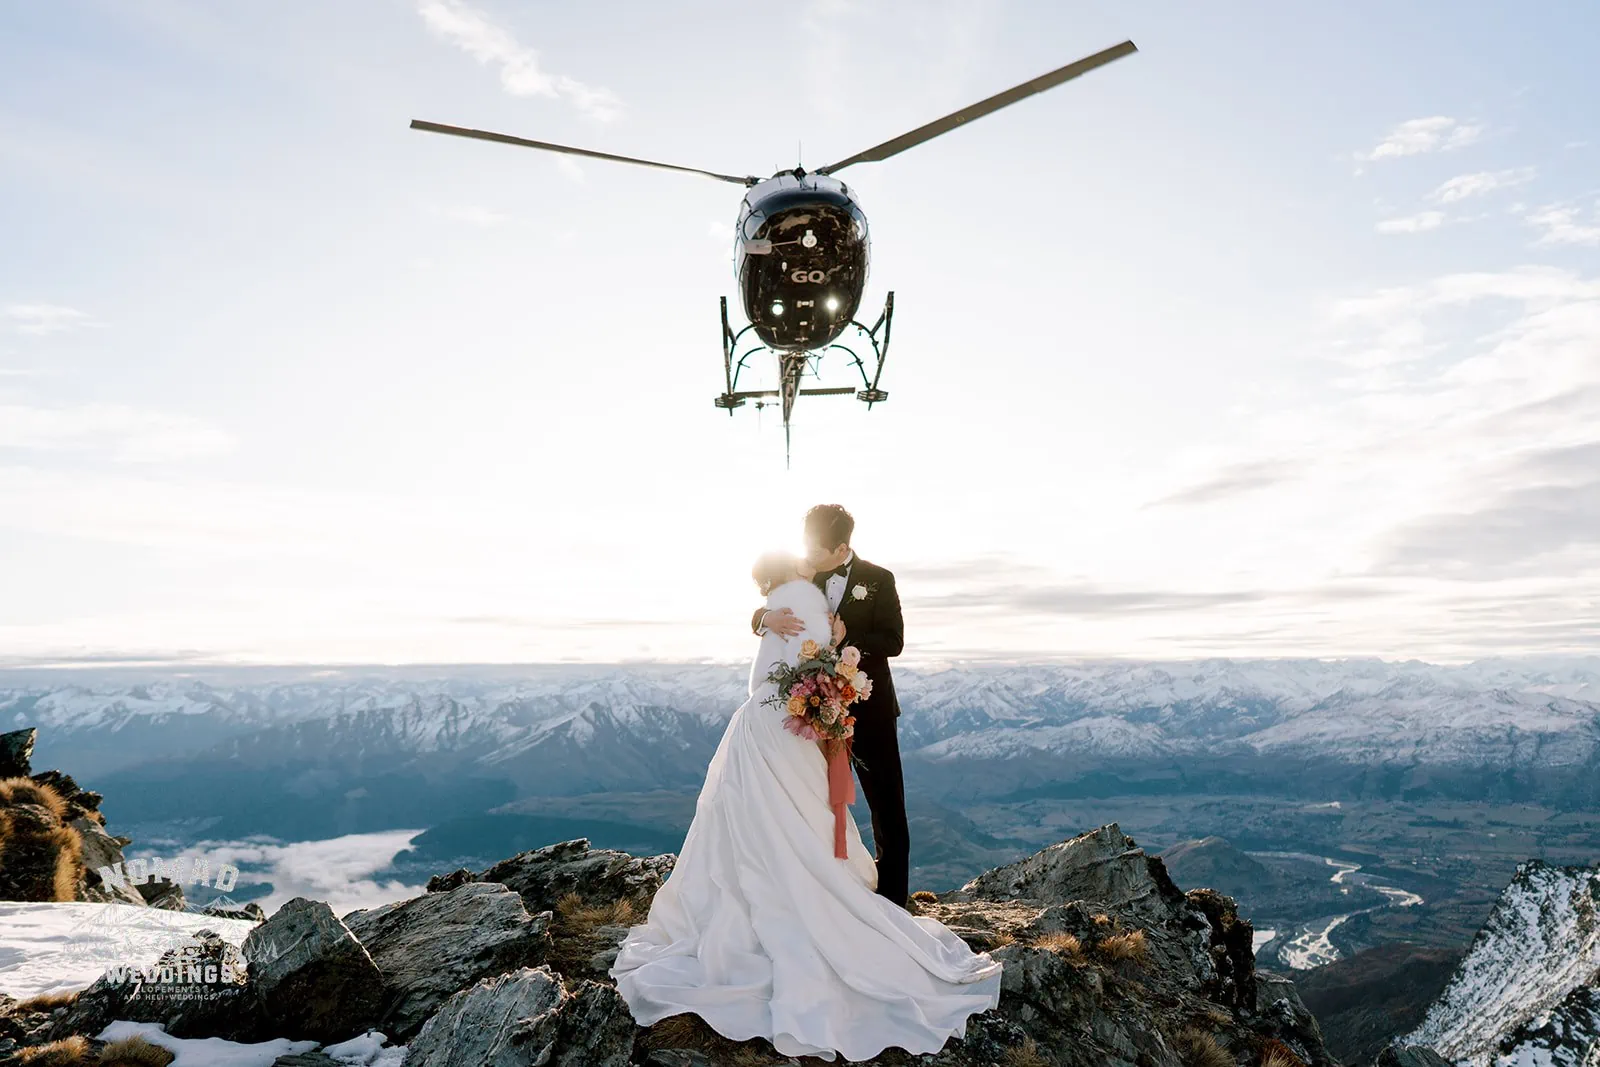 Queenstown New Zealand Elopement Wedding Photographer - Bo and Junyi, on top of a mountain, embrace their unforgettable heli pre-wedding shoot featuring 4 breathtaking landings.